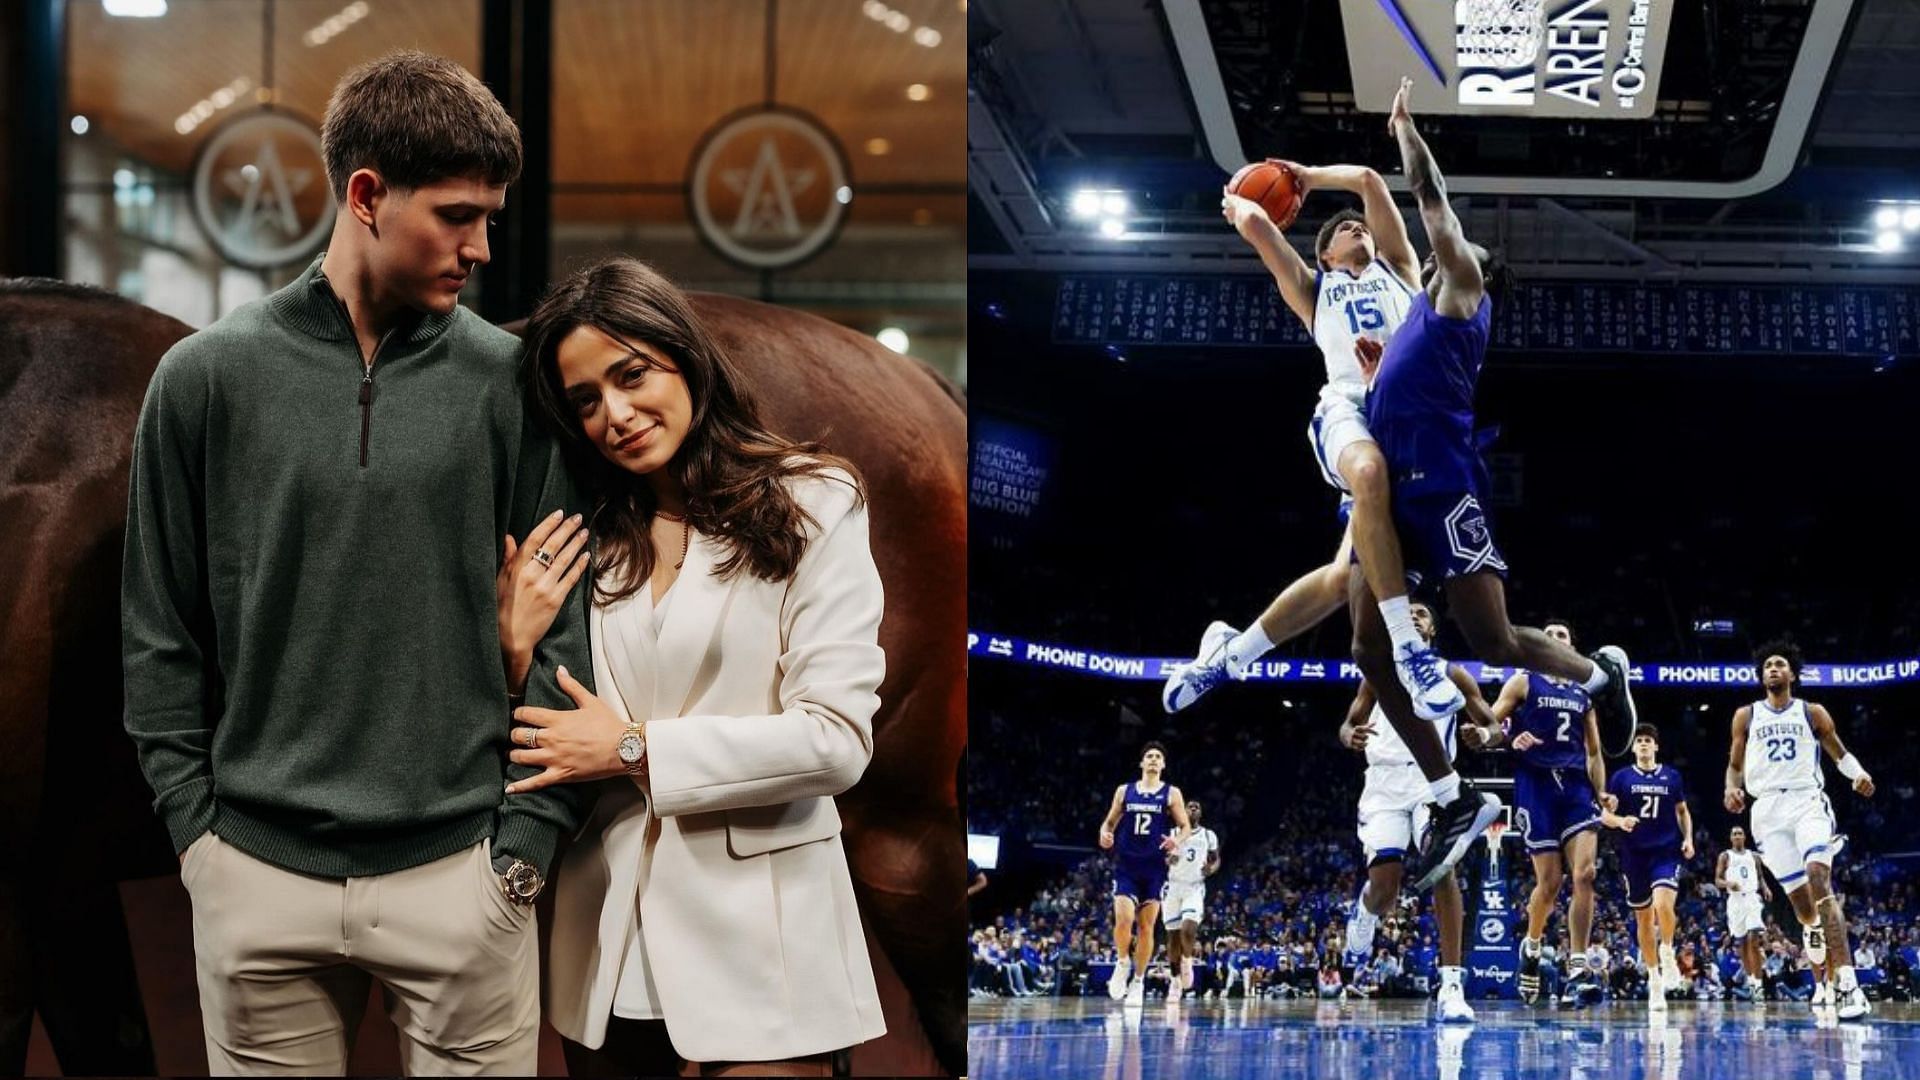 Kentucky Wildcats player, Reed Sheppard and GF, Brailey 